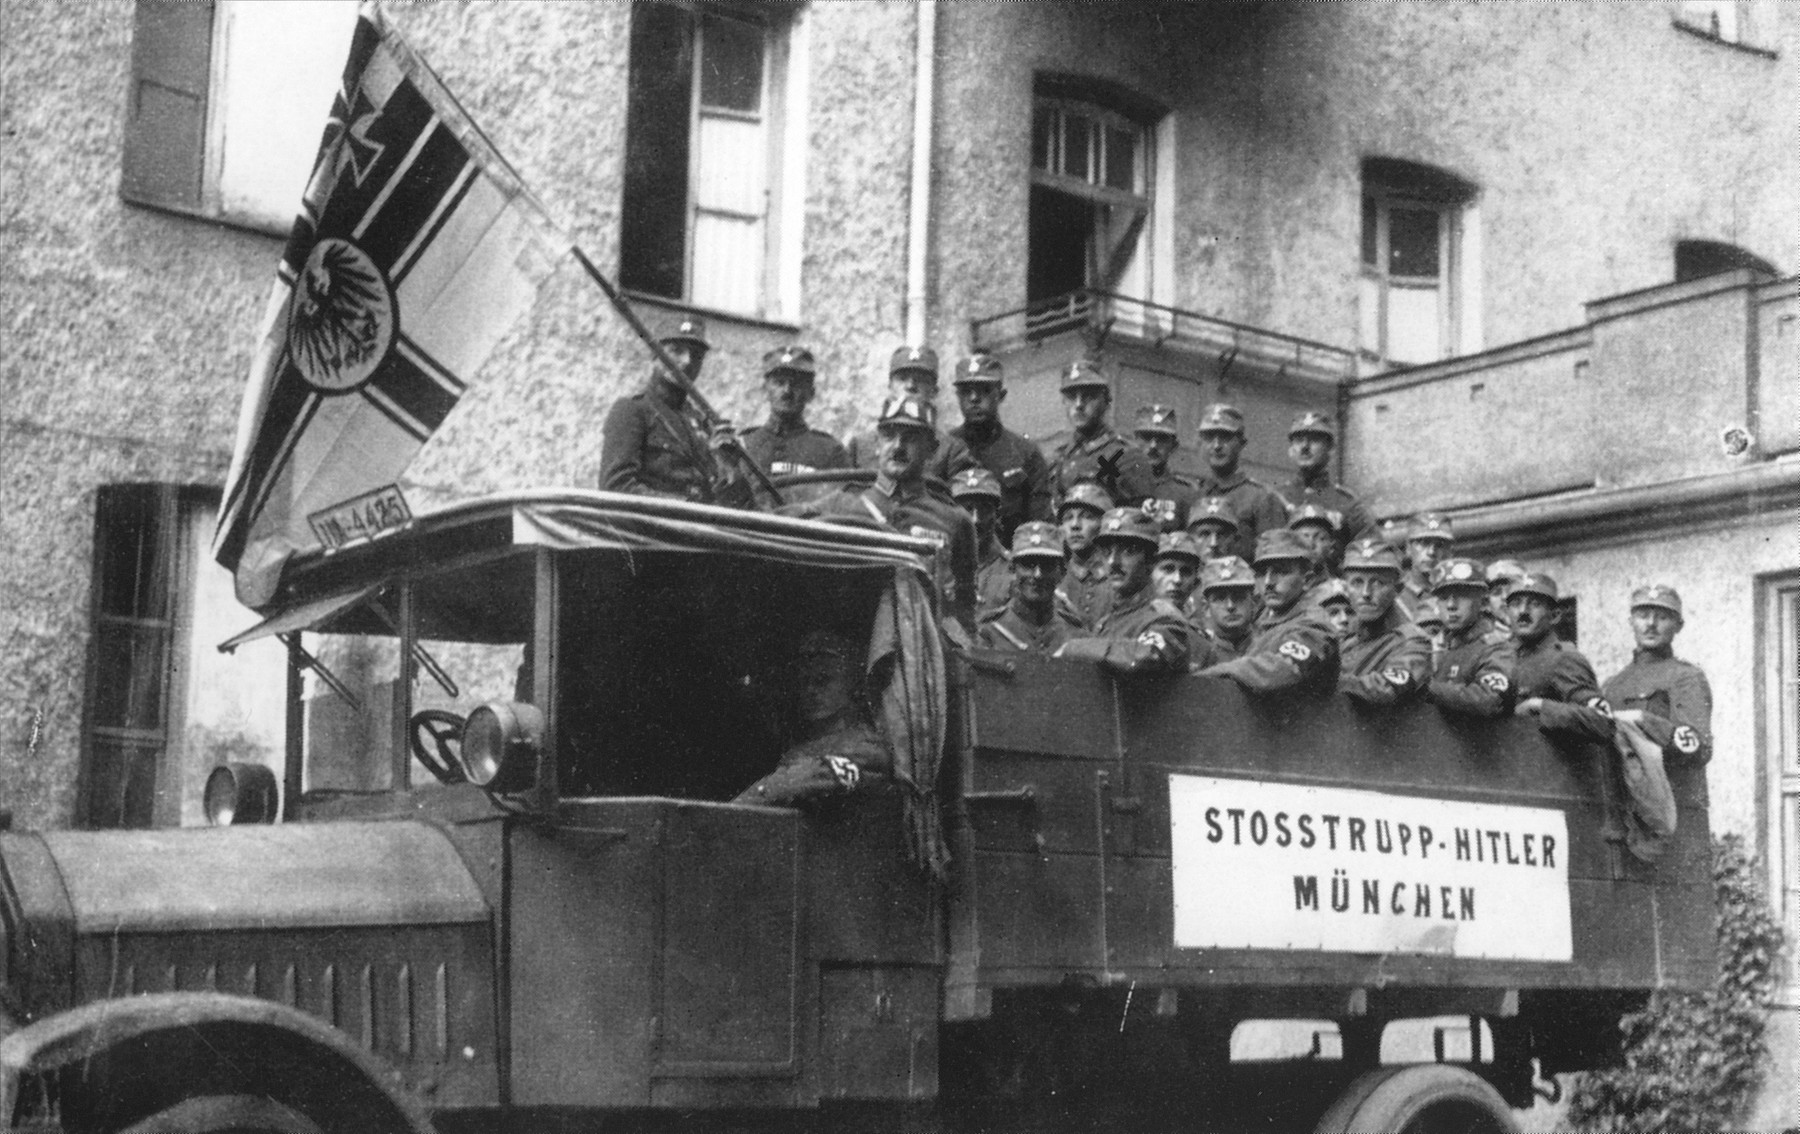 Members of the "Adolf Hitler" SA unit pose on the back of a truck just prior to their departure for Bayreuth to participate in the annual "German Day" celebration.  One of them holds the old Imperial German flag.